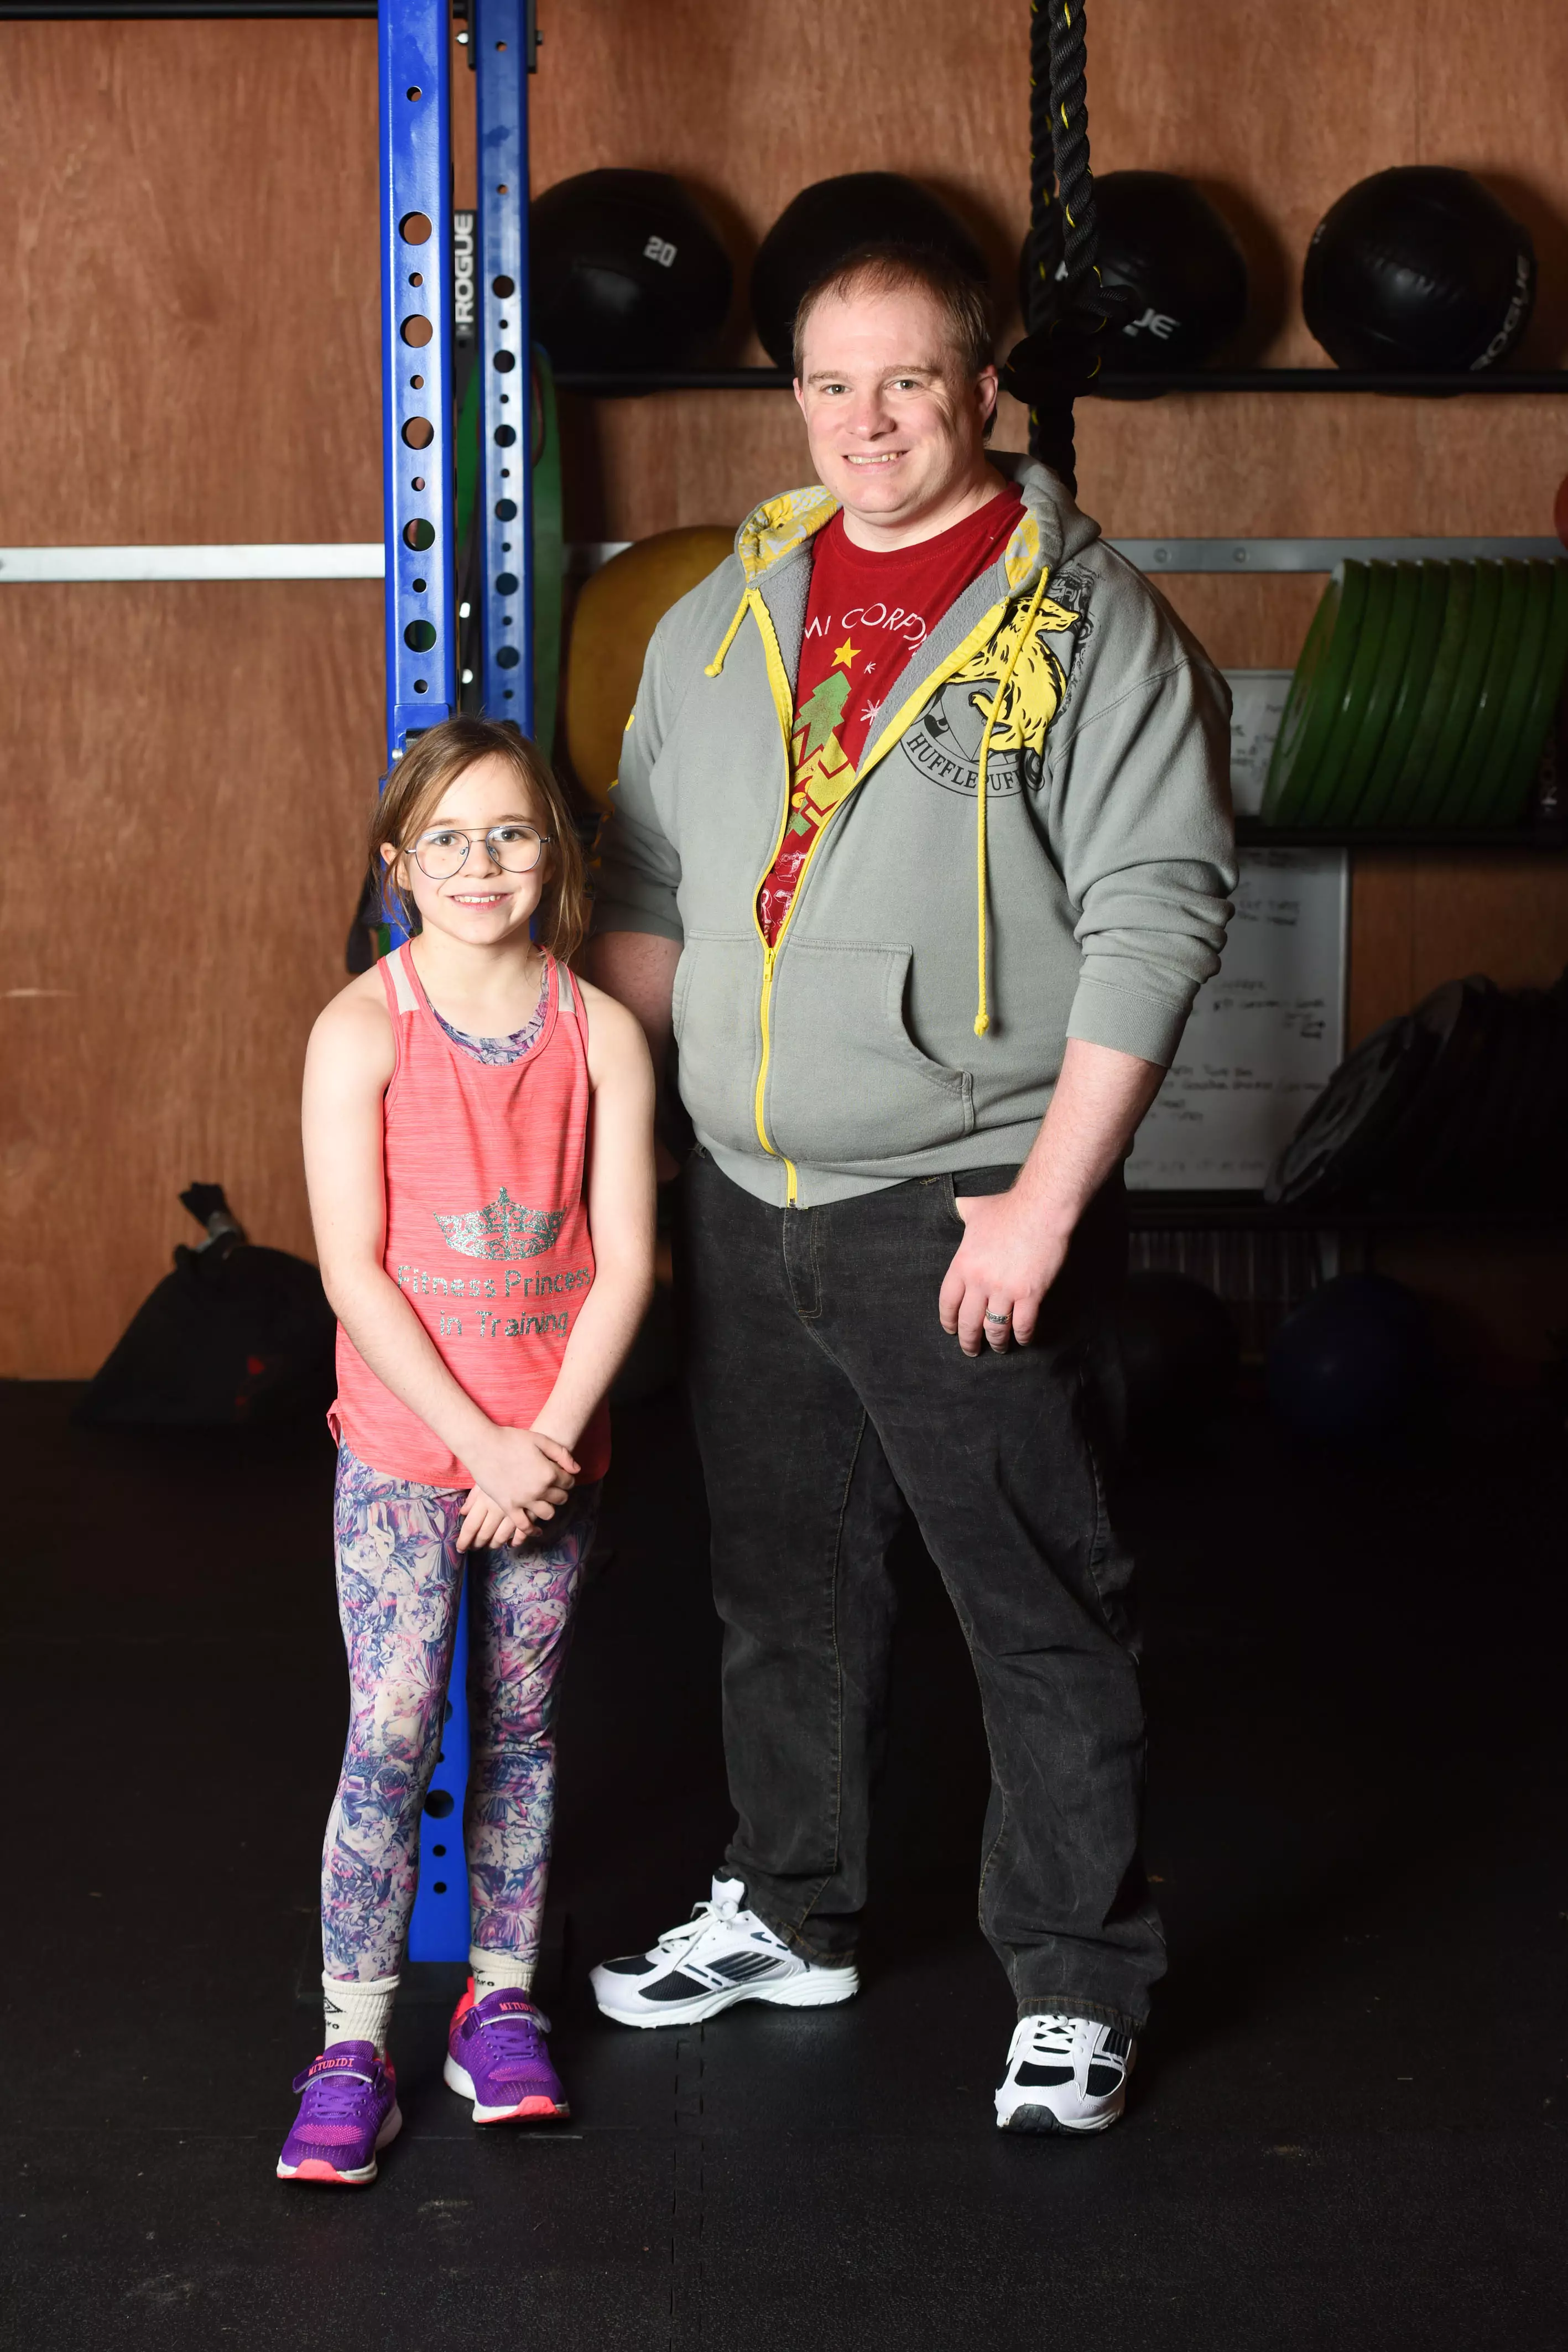 Craig is very proud of his little fitness fanatic.